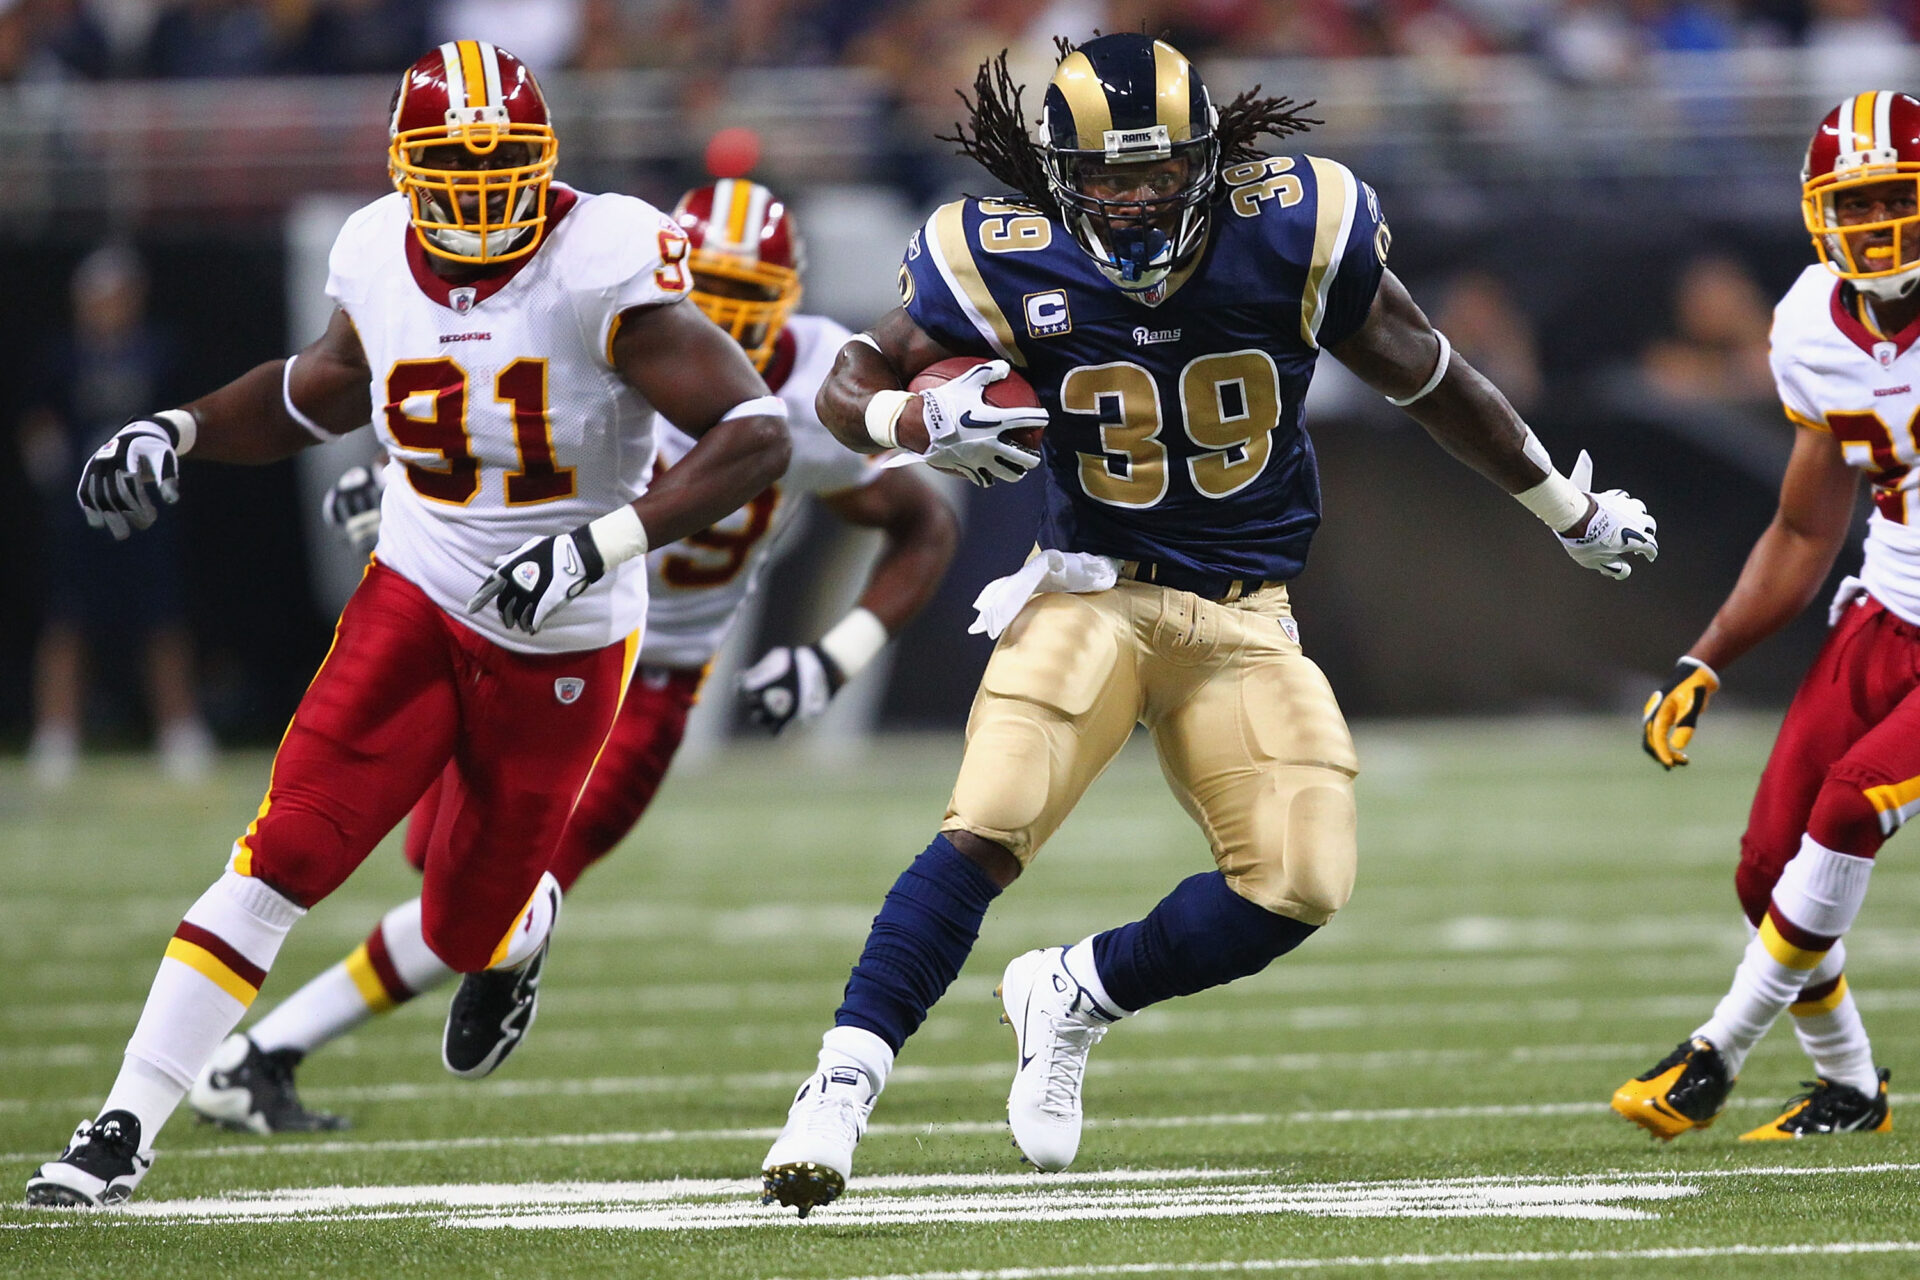 ST. LOUIS - SEPTEMBER 26: Steven Jackson #39 of the St. Louis Rams rushes against the Washington Redskins at the Edward Jones Dome on September 26, 2010 in St. Louis, Missouri. The Rams beat the Redskins 30-16. (Photo by Dilip Vishwanat/Getty Images)